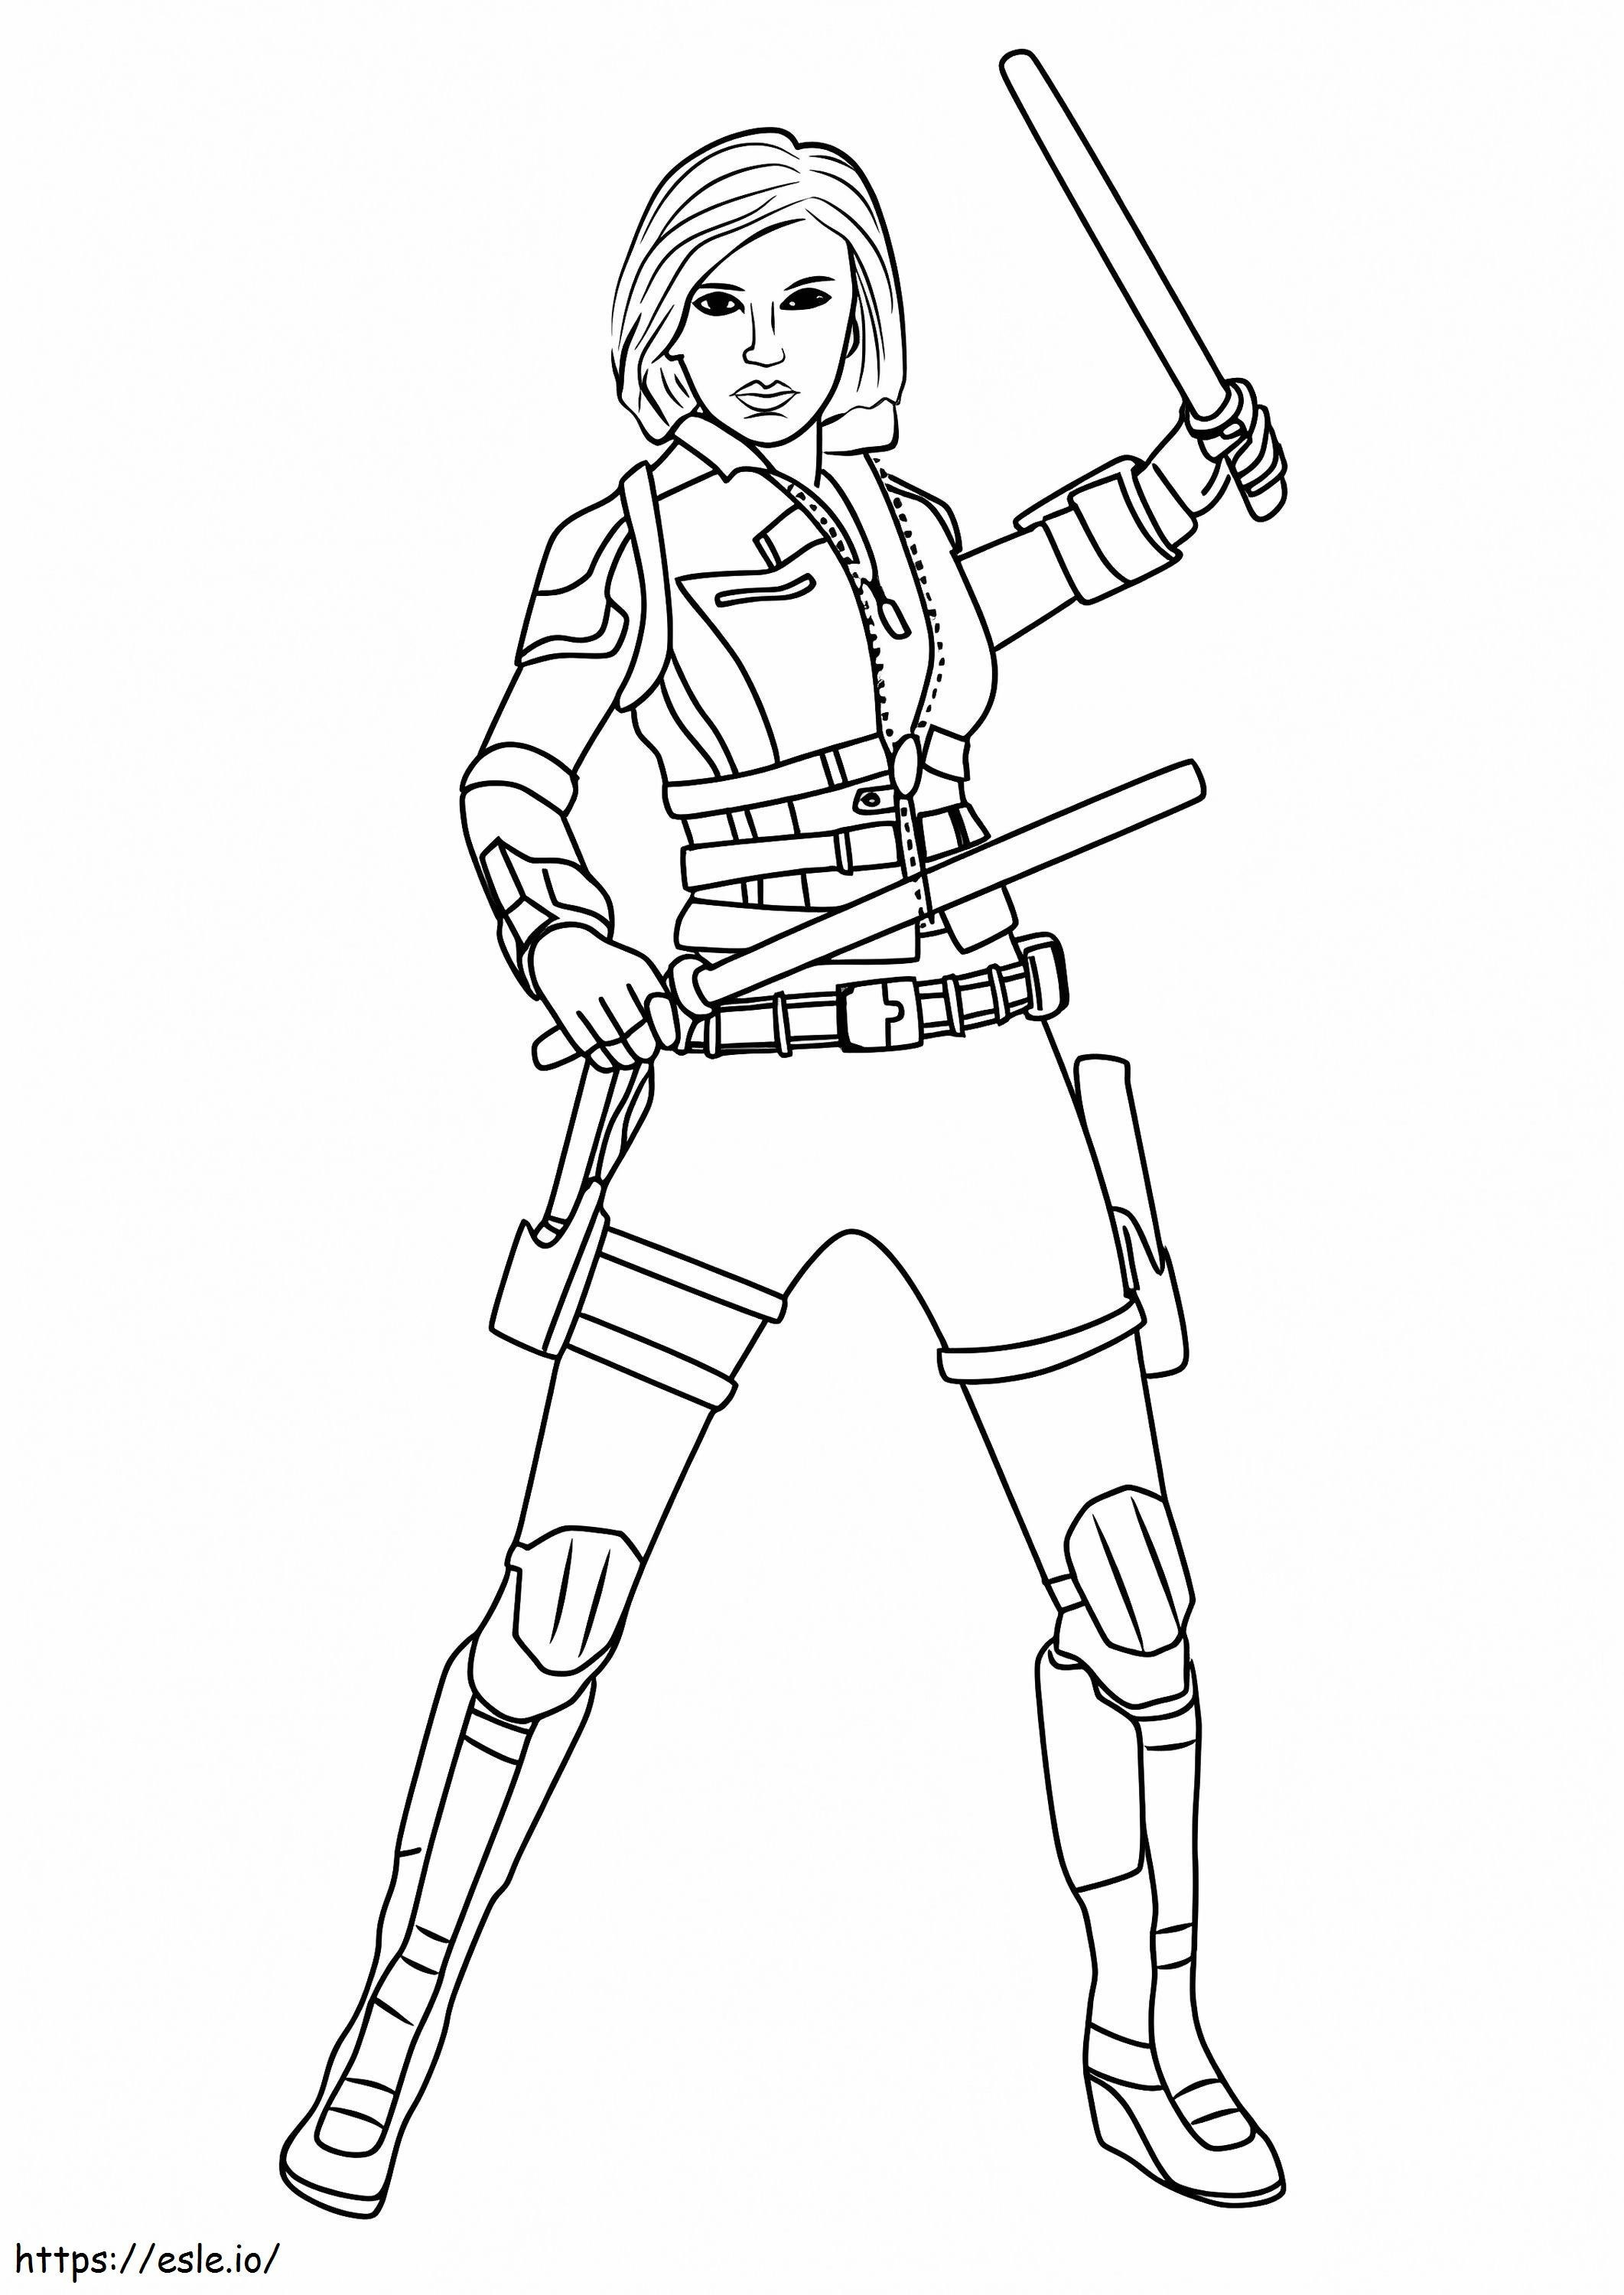 Amazing Black Widow coloring page